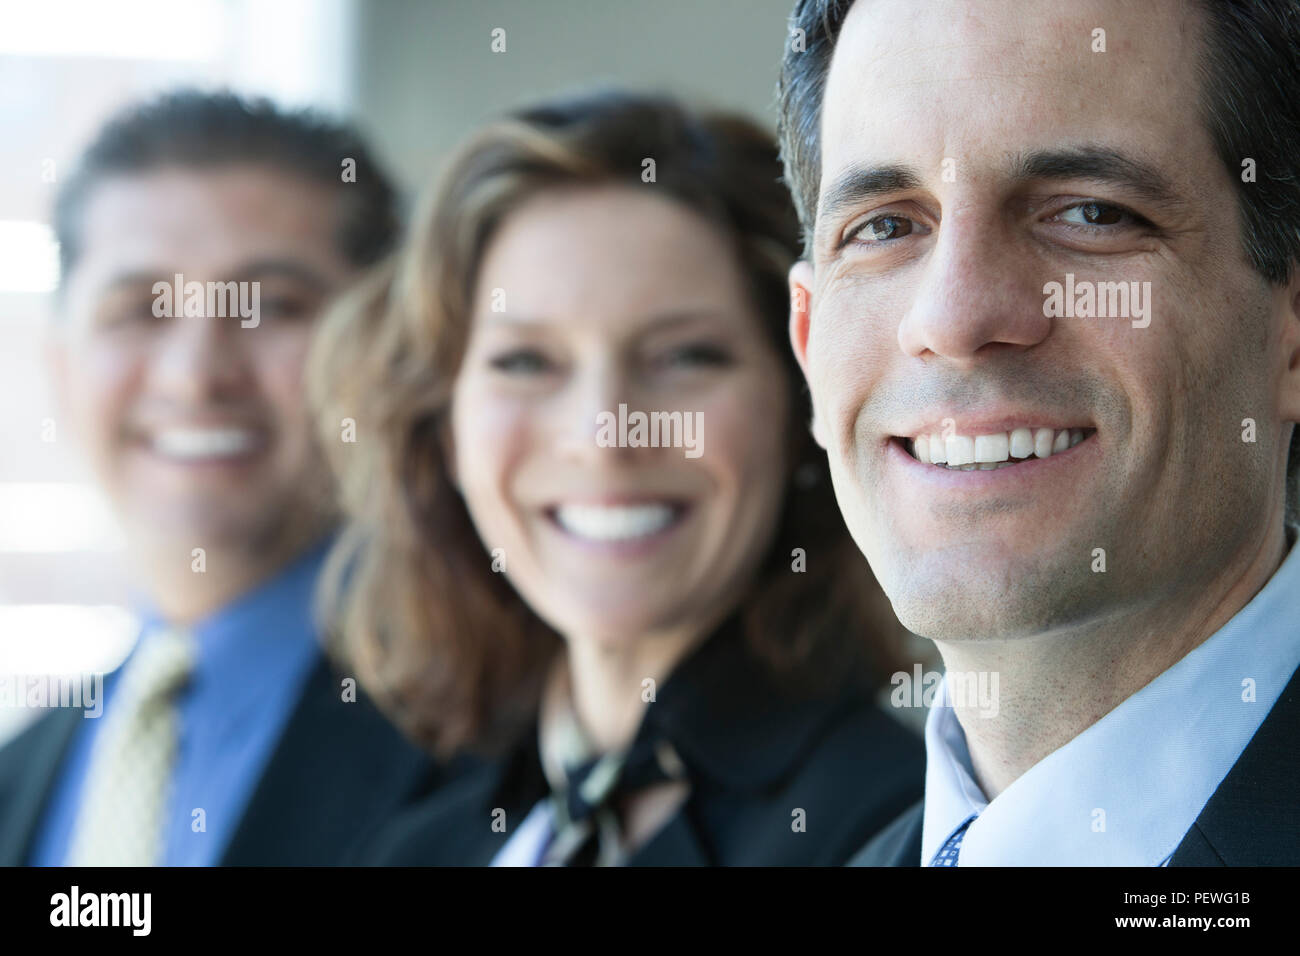 A closeup portrait of a row of multi ethnic business people, with focus on the Caucasian businessman. Stock Photo